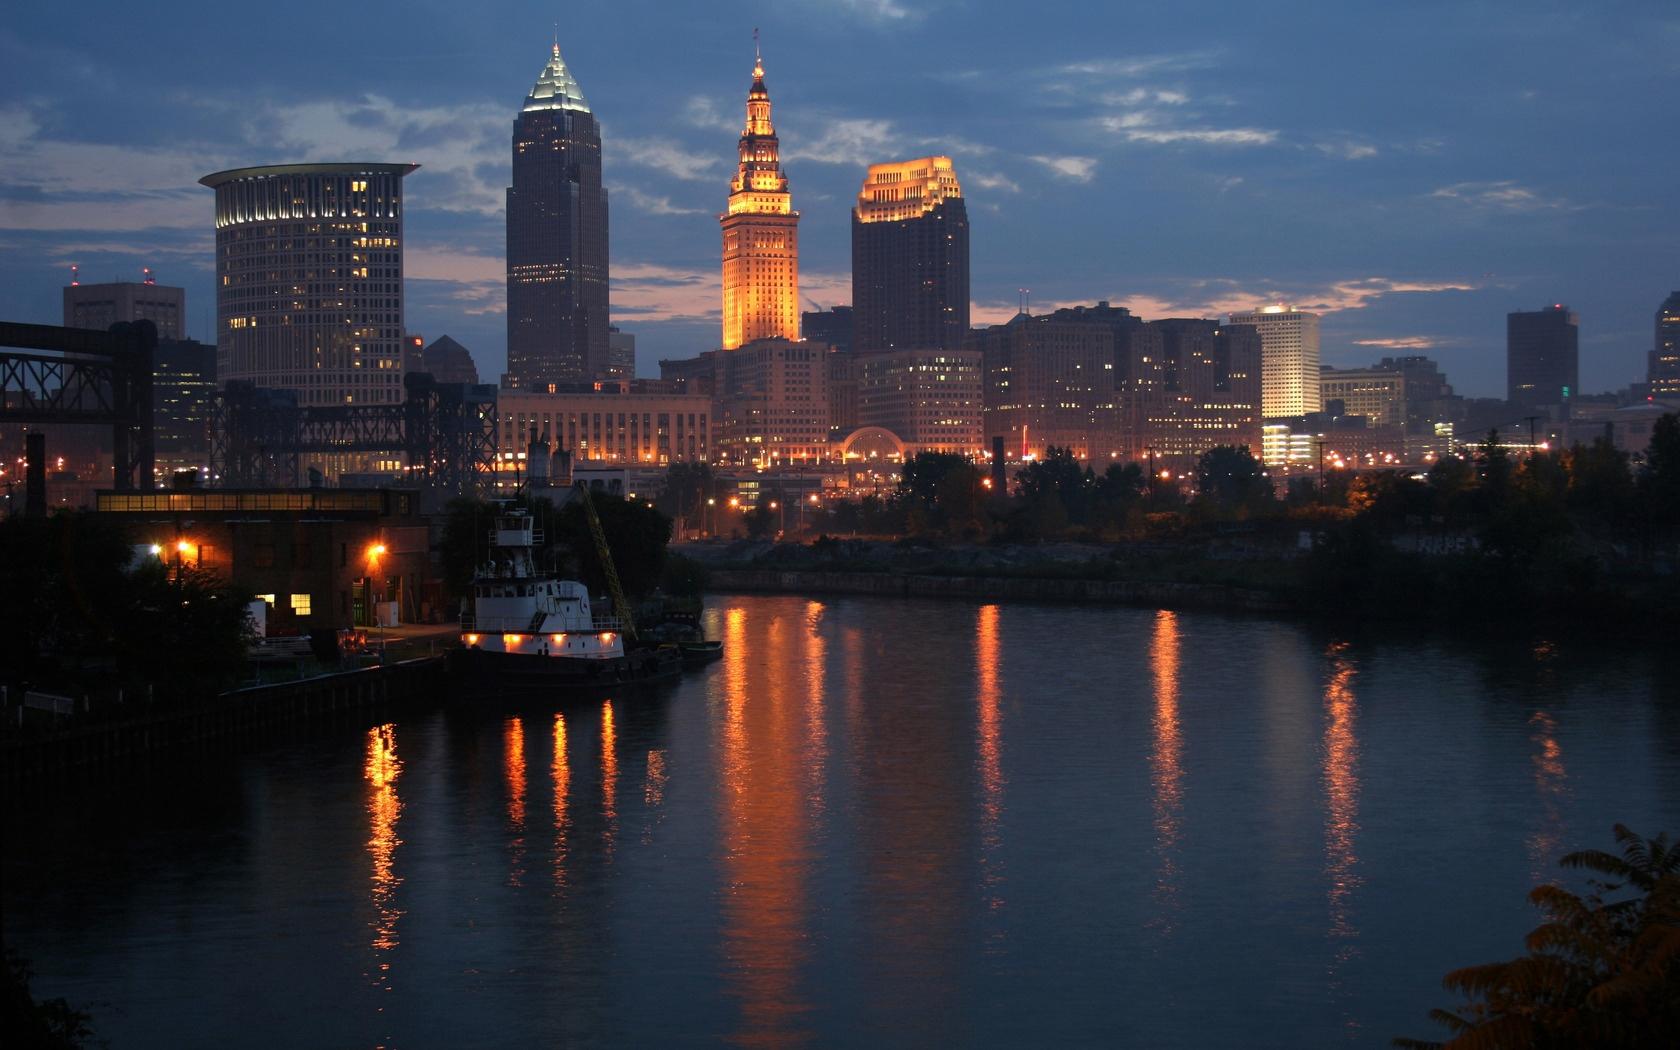 Download wallpaper 1680x1050 cleveland, ohio, united states HD